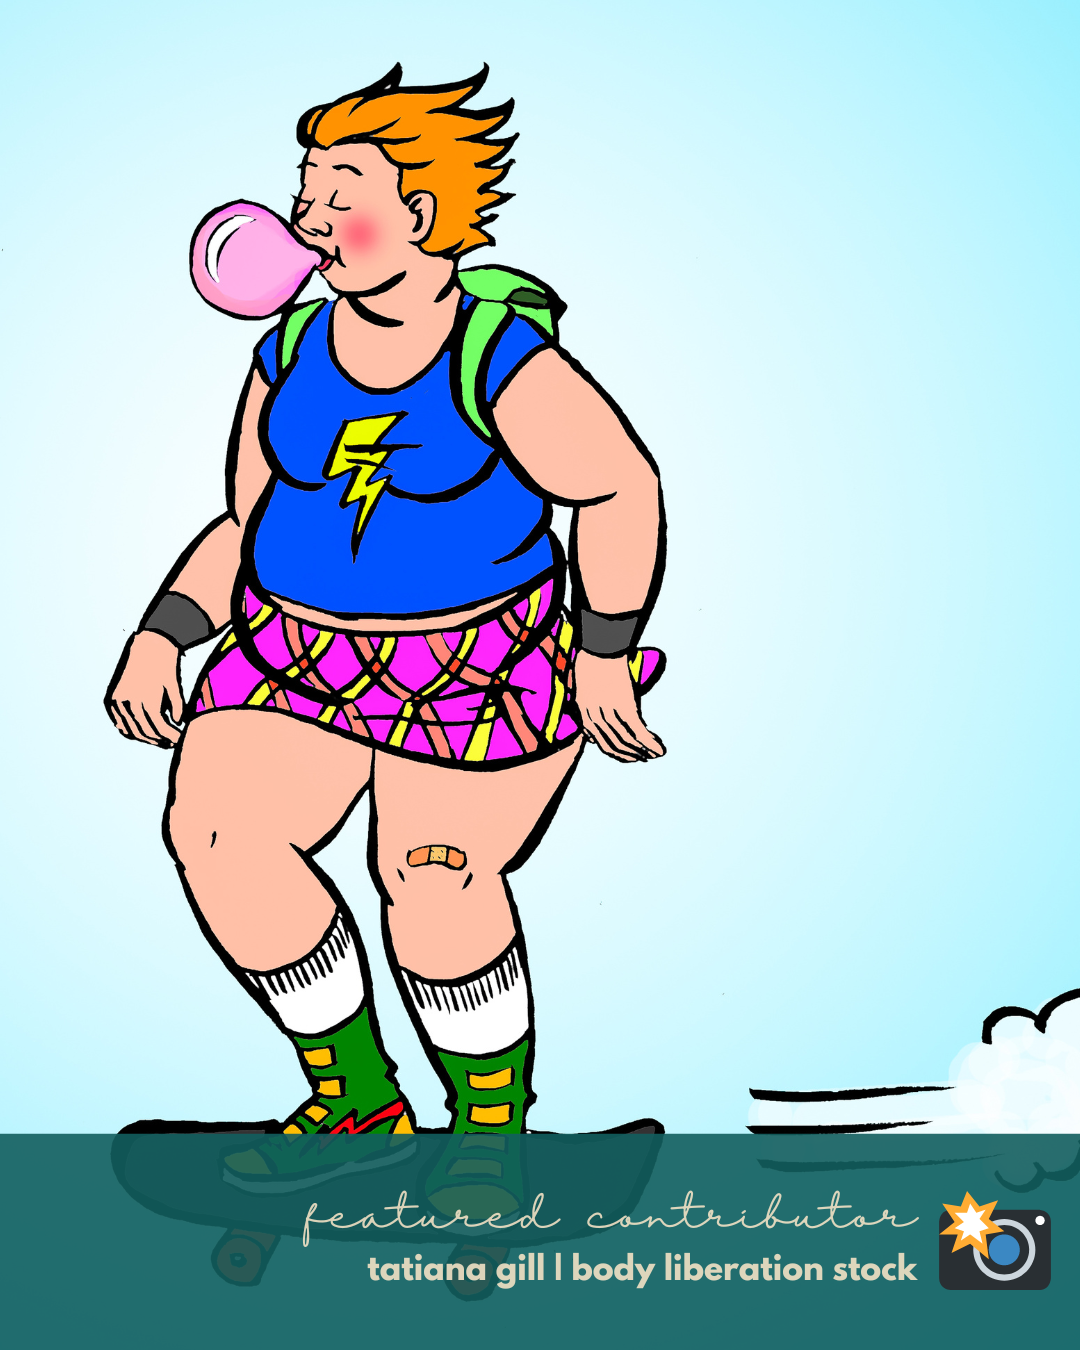 An illustration of a fat white person with orange hair riding a skateboard and blowing a chewing gum bubble.